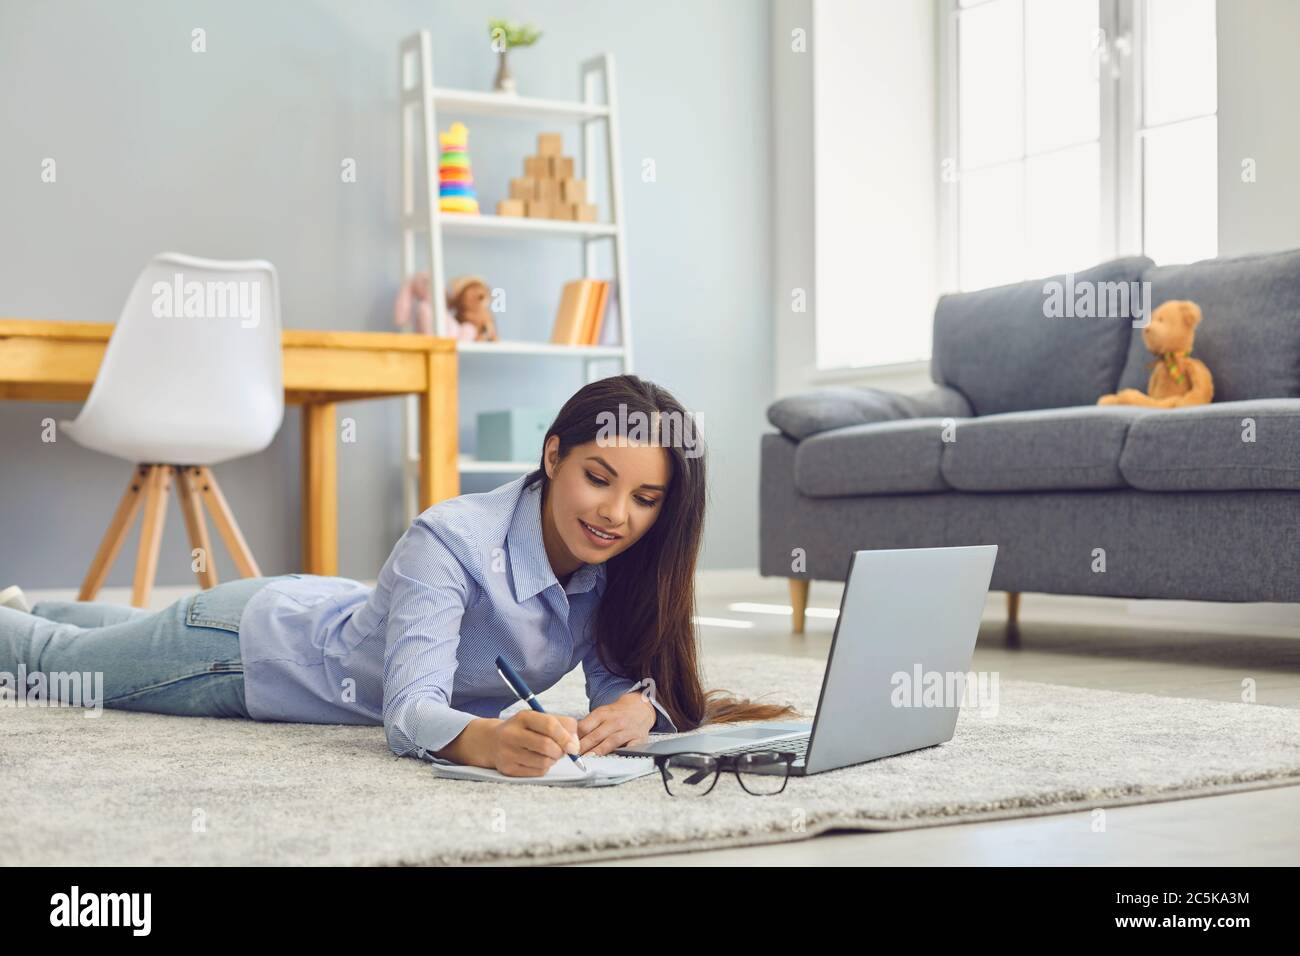 Work from home. Beautiful woman taking notes during online business conference or educational class on laptop in room Stock Photo